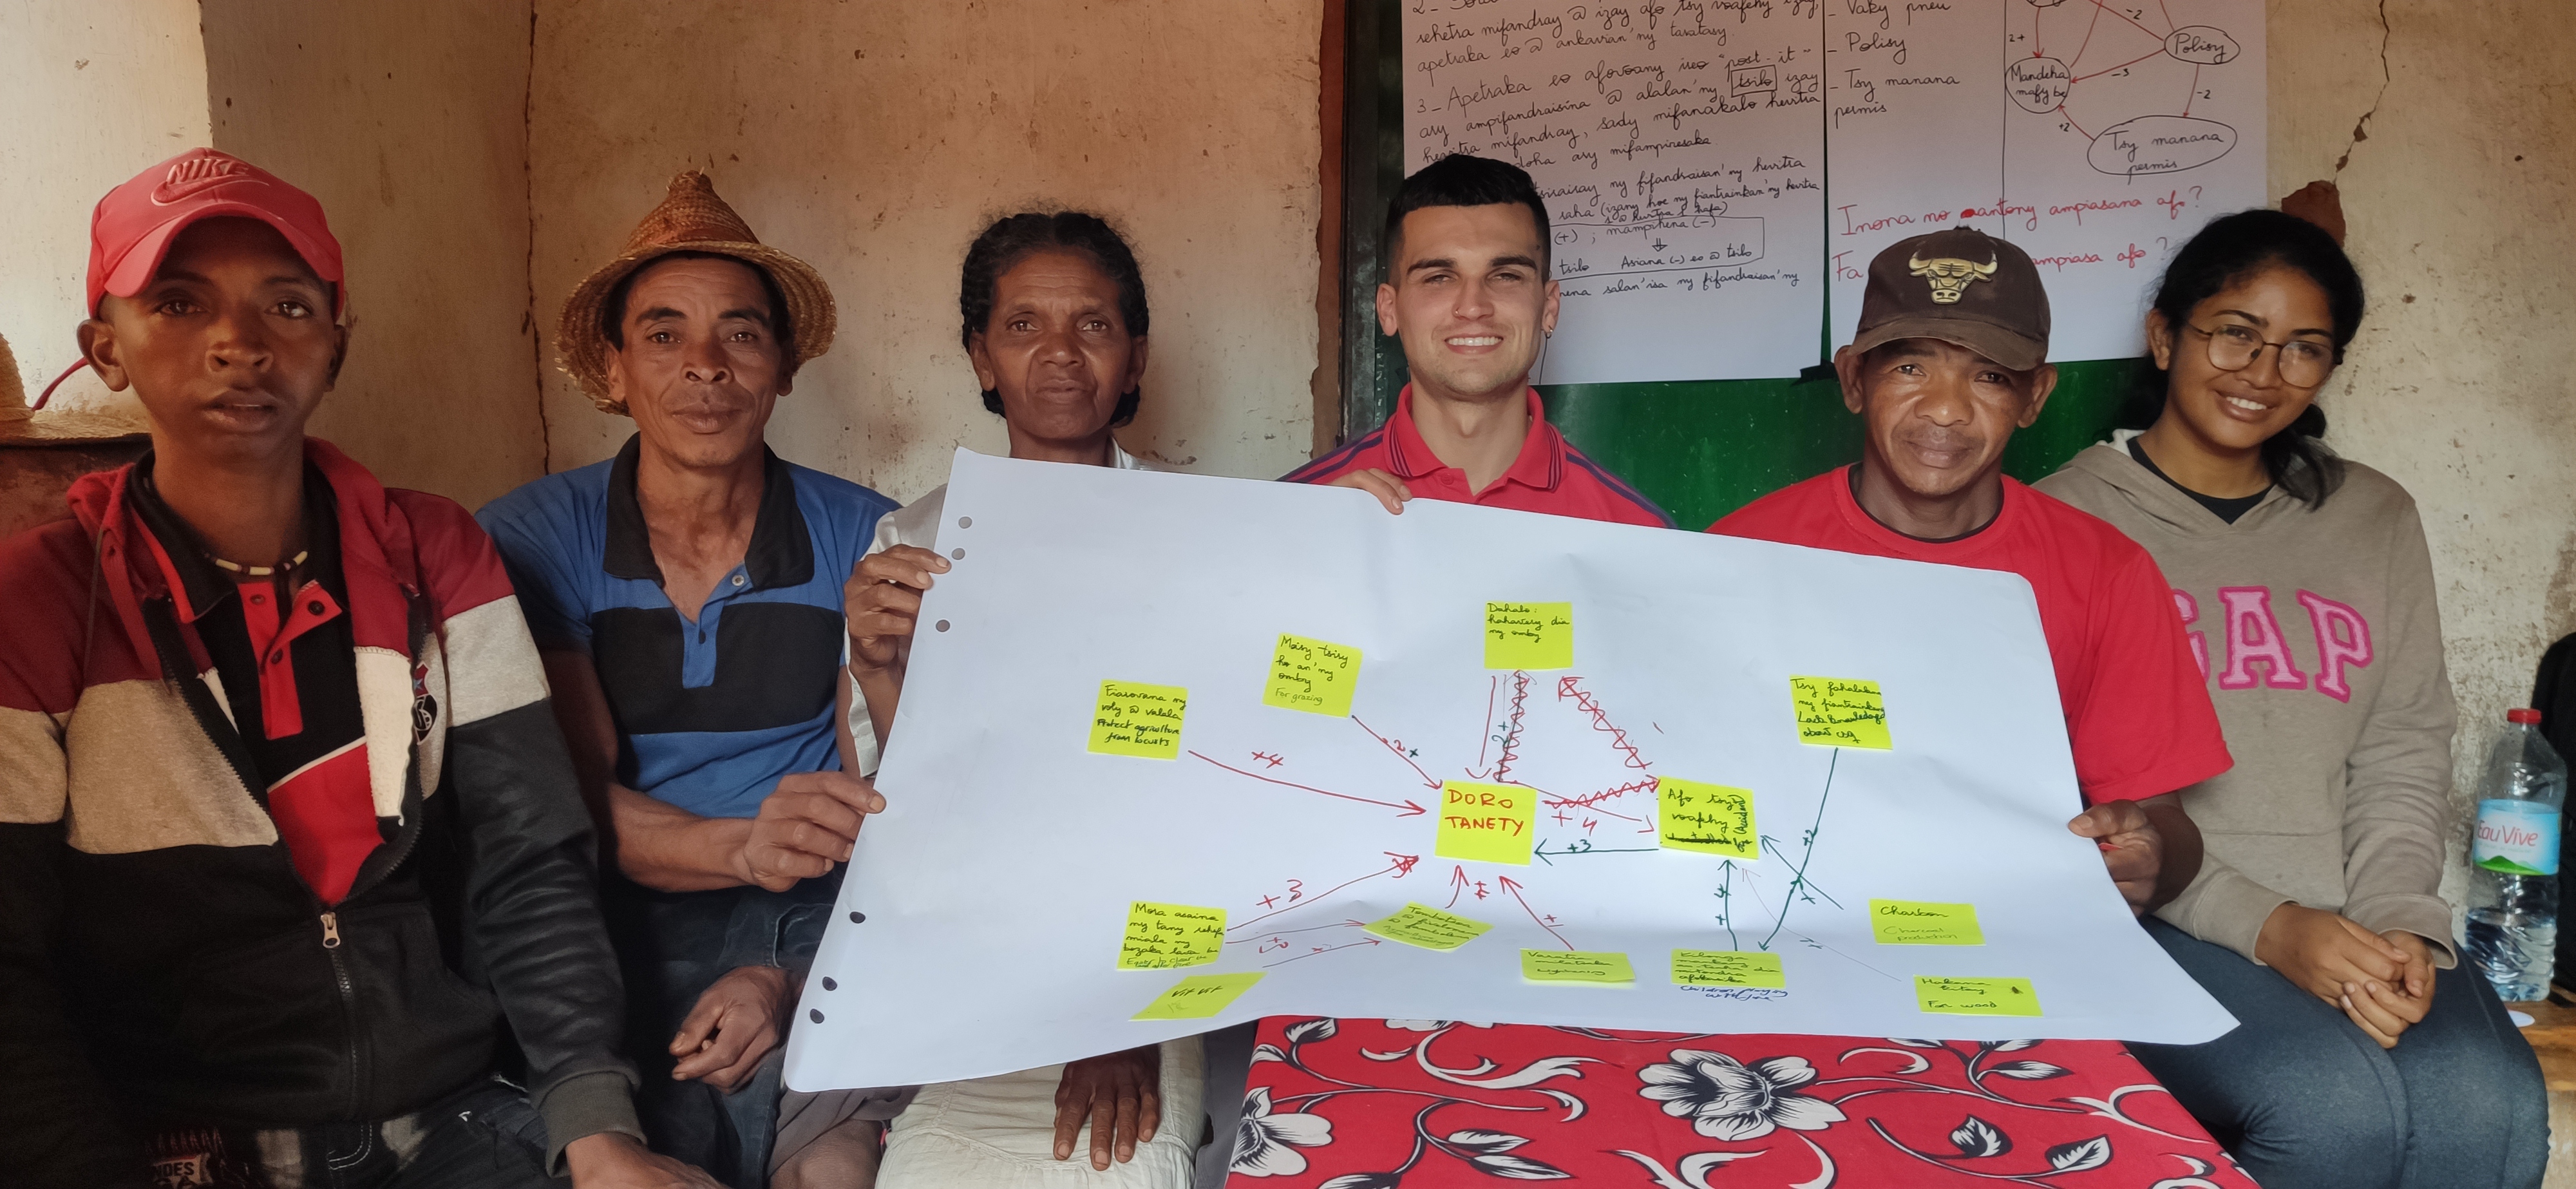 Valuable knowledge: researchers and participants proudly display the fruits of their collaborative efforts, a mental map of dorotanety (wildfire). 